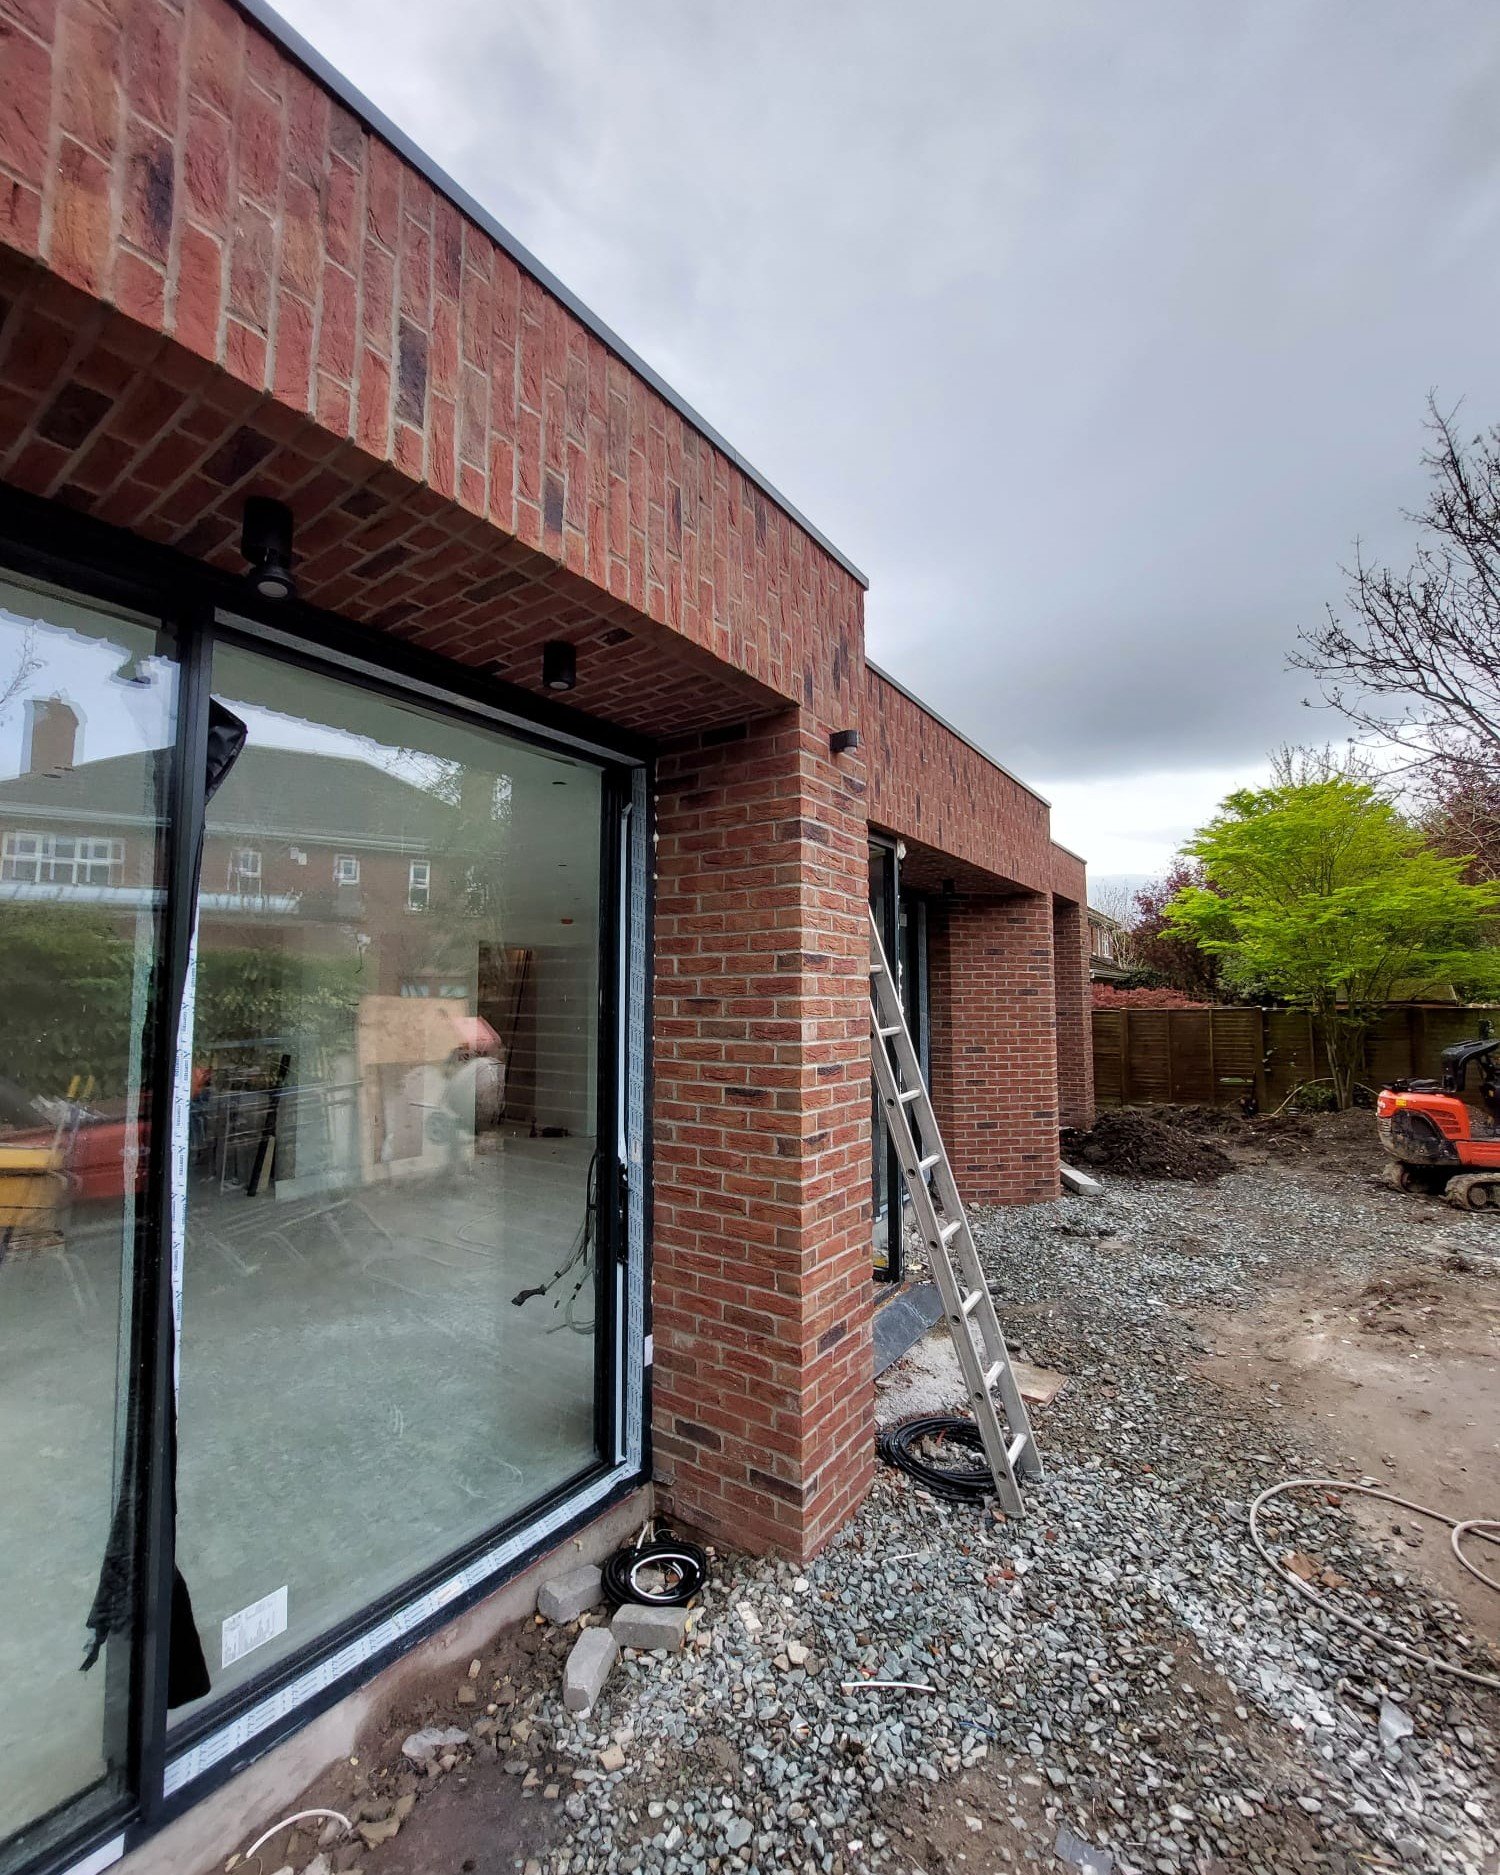 Work in progress ⏳

This extension to existing house in South County Dublin nearing completion for our client.

Looking forward to seeing the finished product!
.
.
.

#architect #irisharchitect #irisharchitecture #irishdesign #irishhomes #dublinhomes